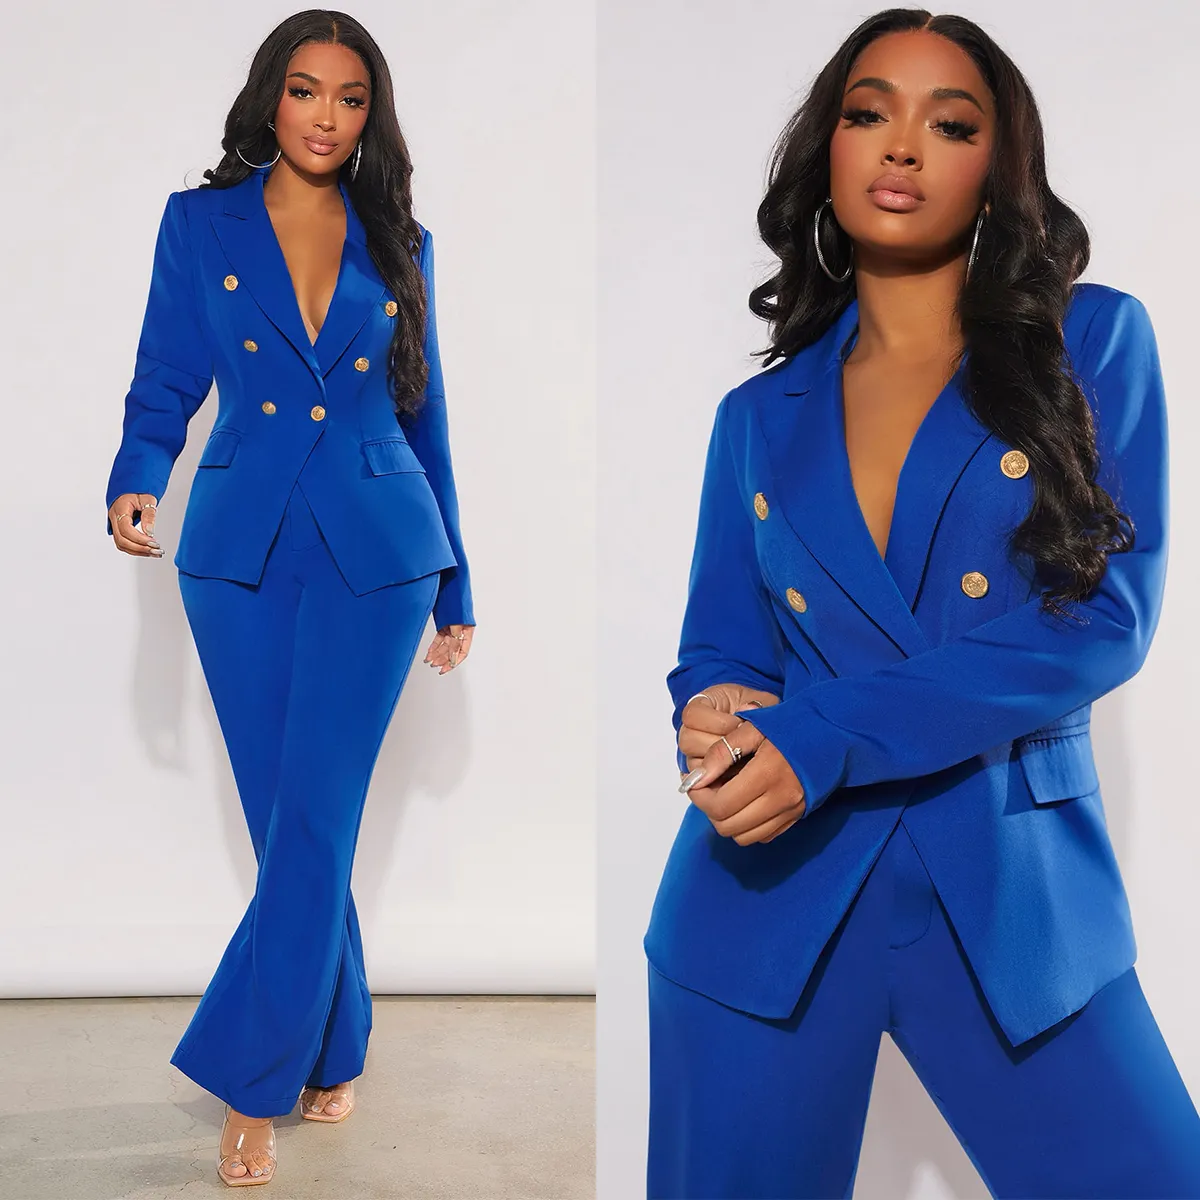 Slim Fit Wide Leg Pants Suit For Women Perfect For Spring, Evening